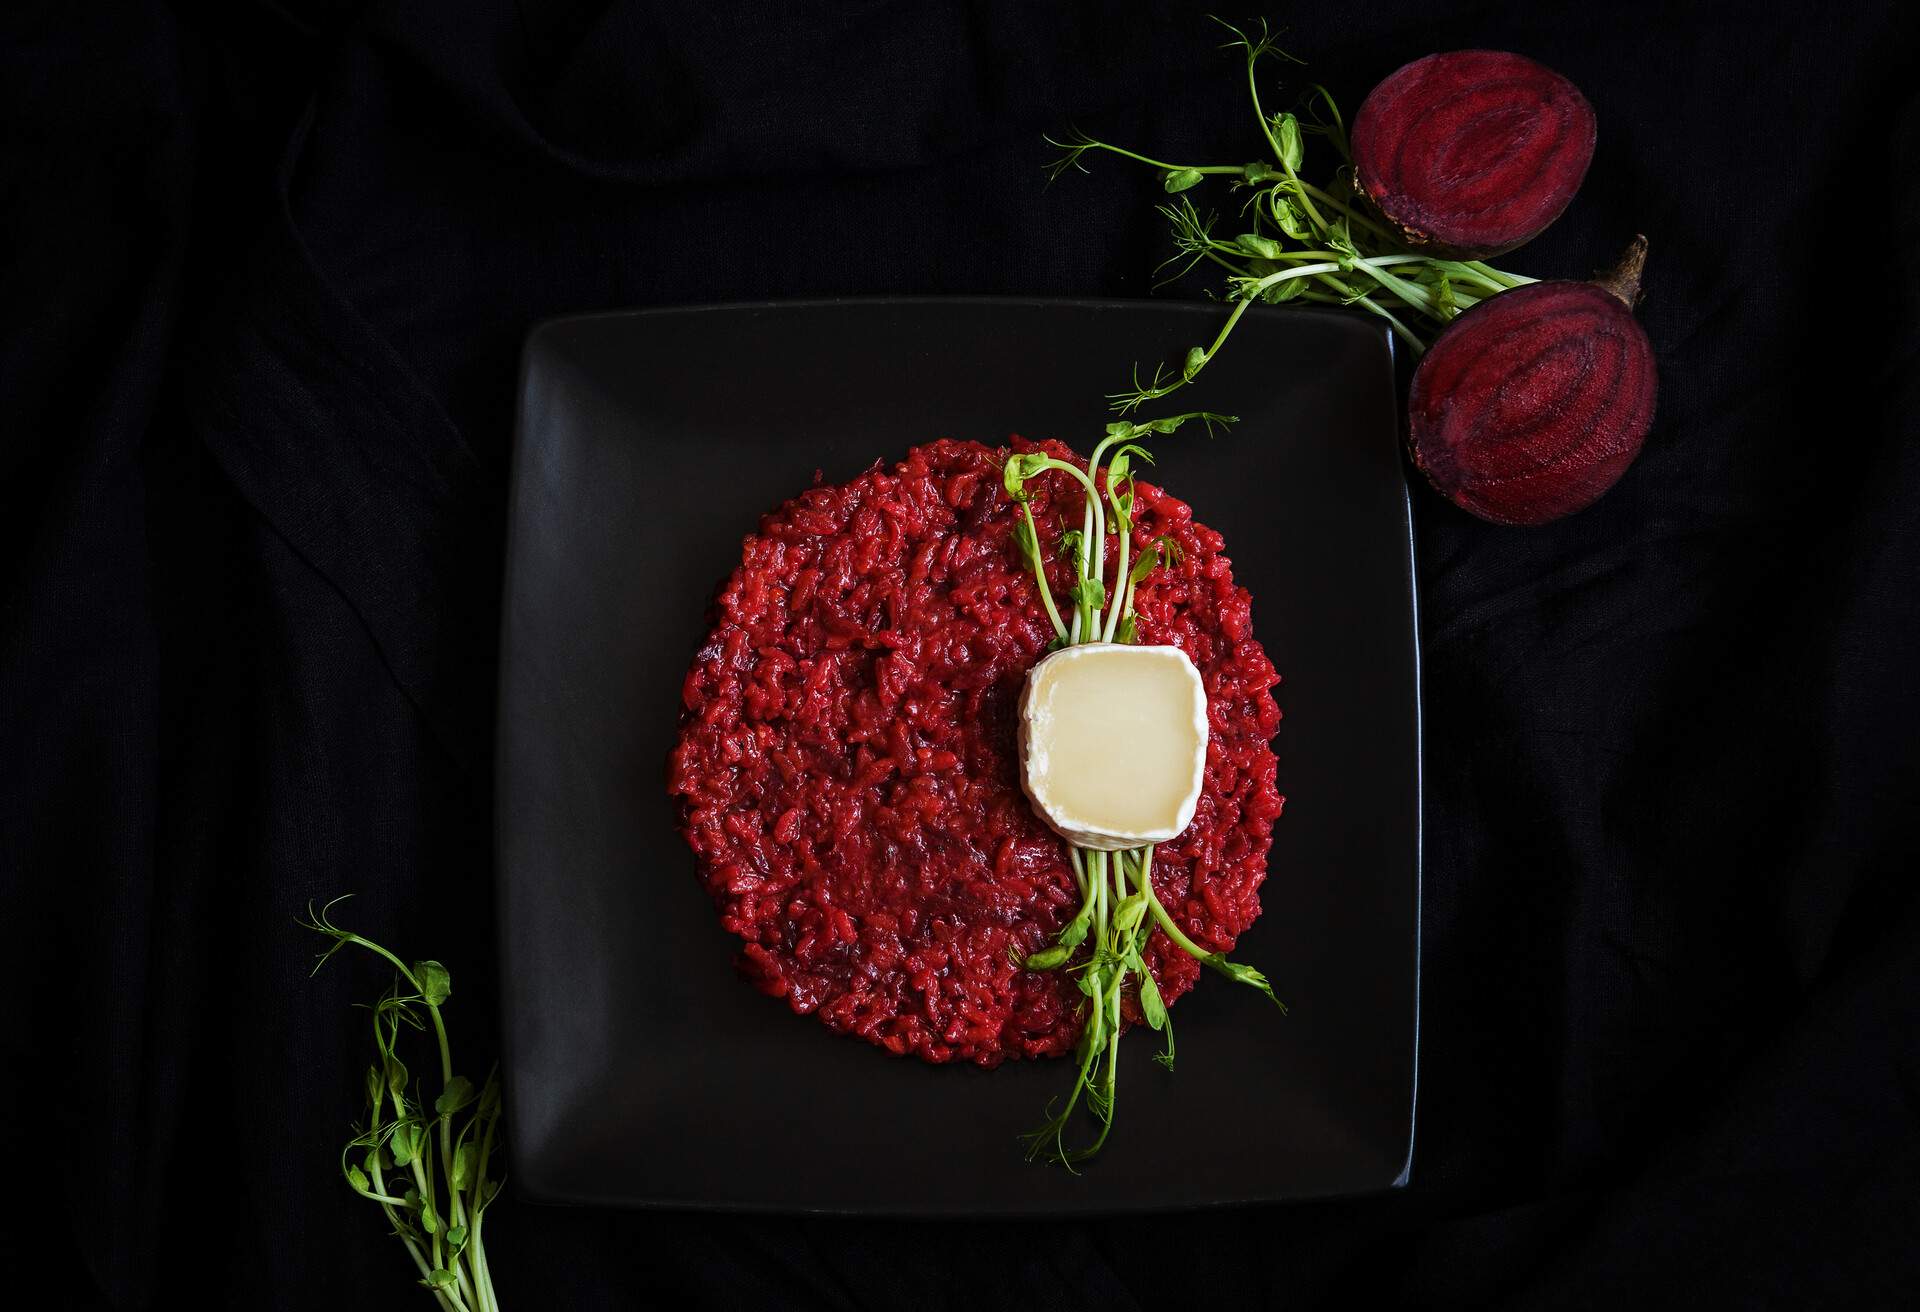 Tasty beetroot risotto with goat cheese and sprouts on a black plate. Culinary eating.